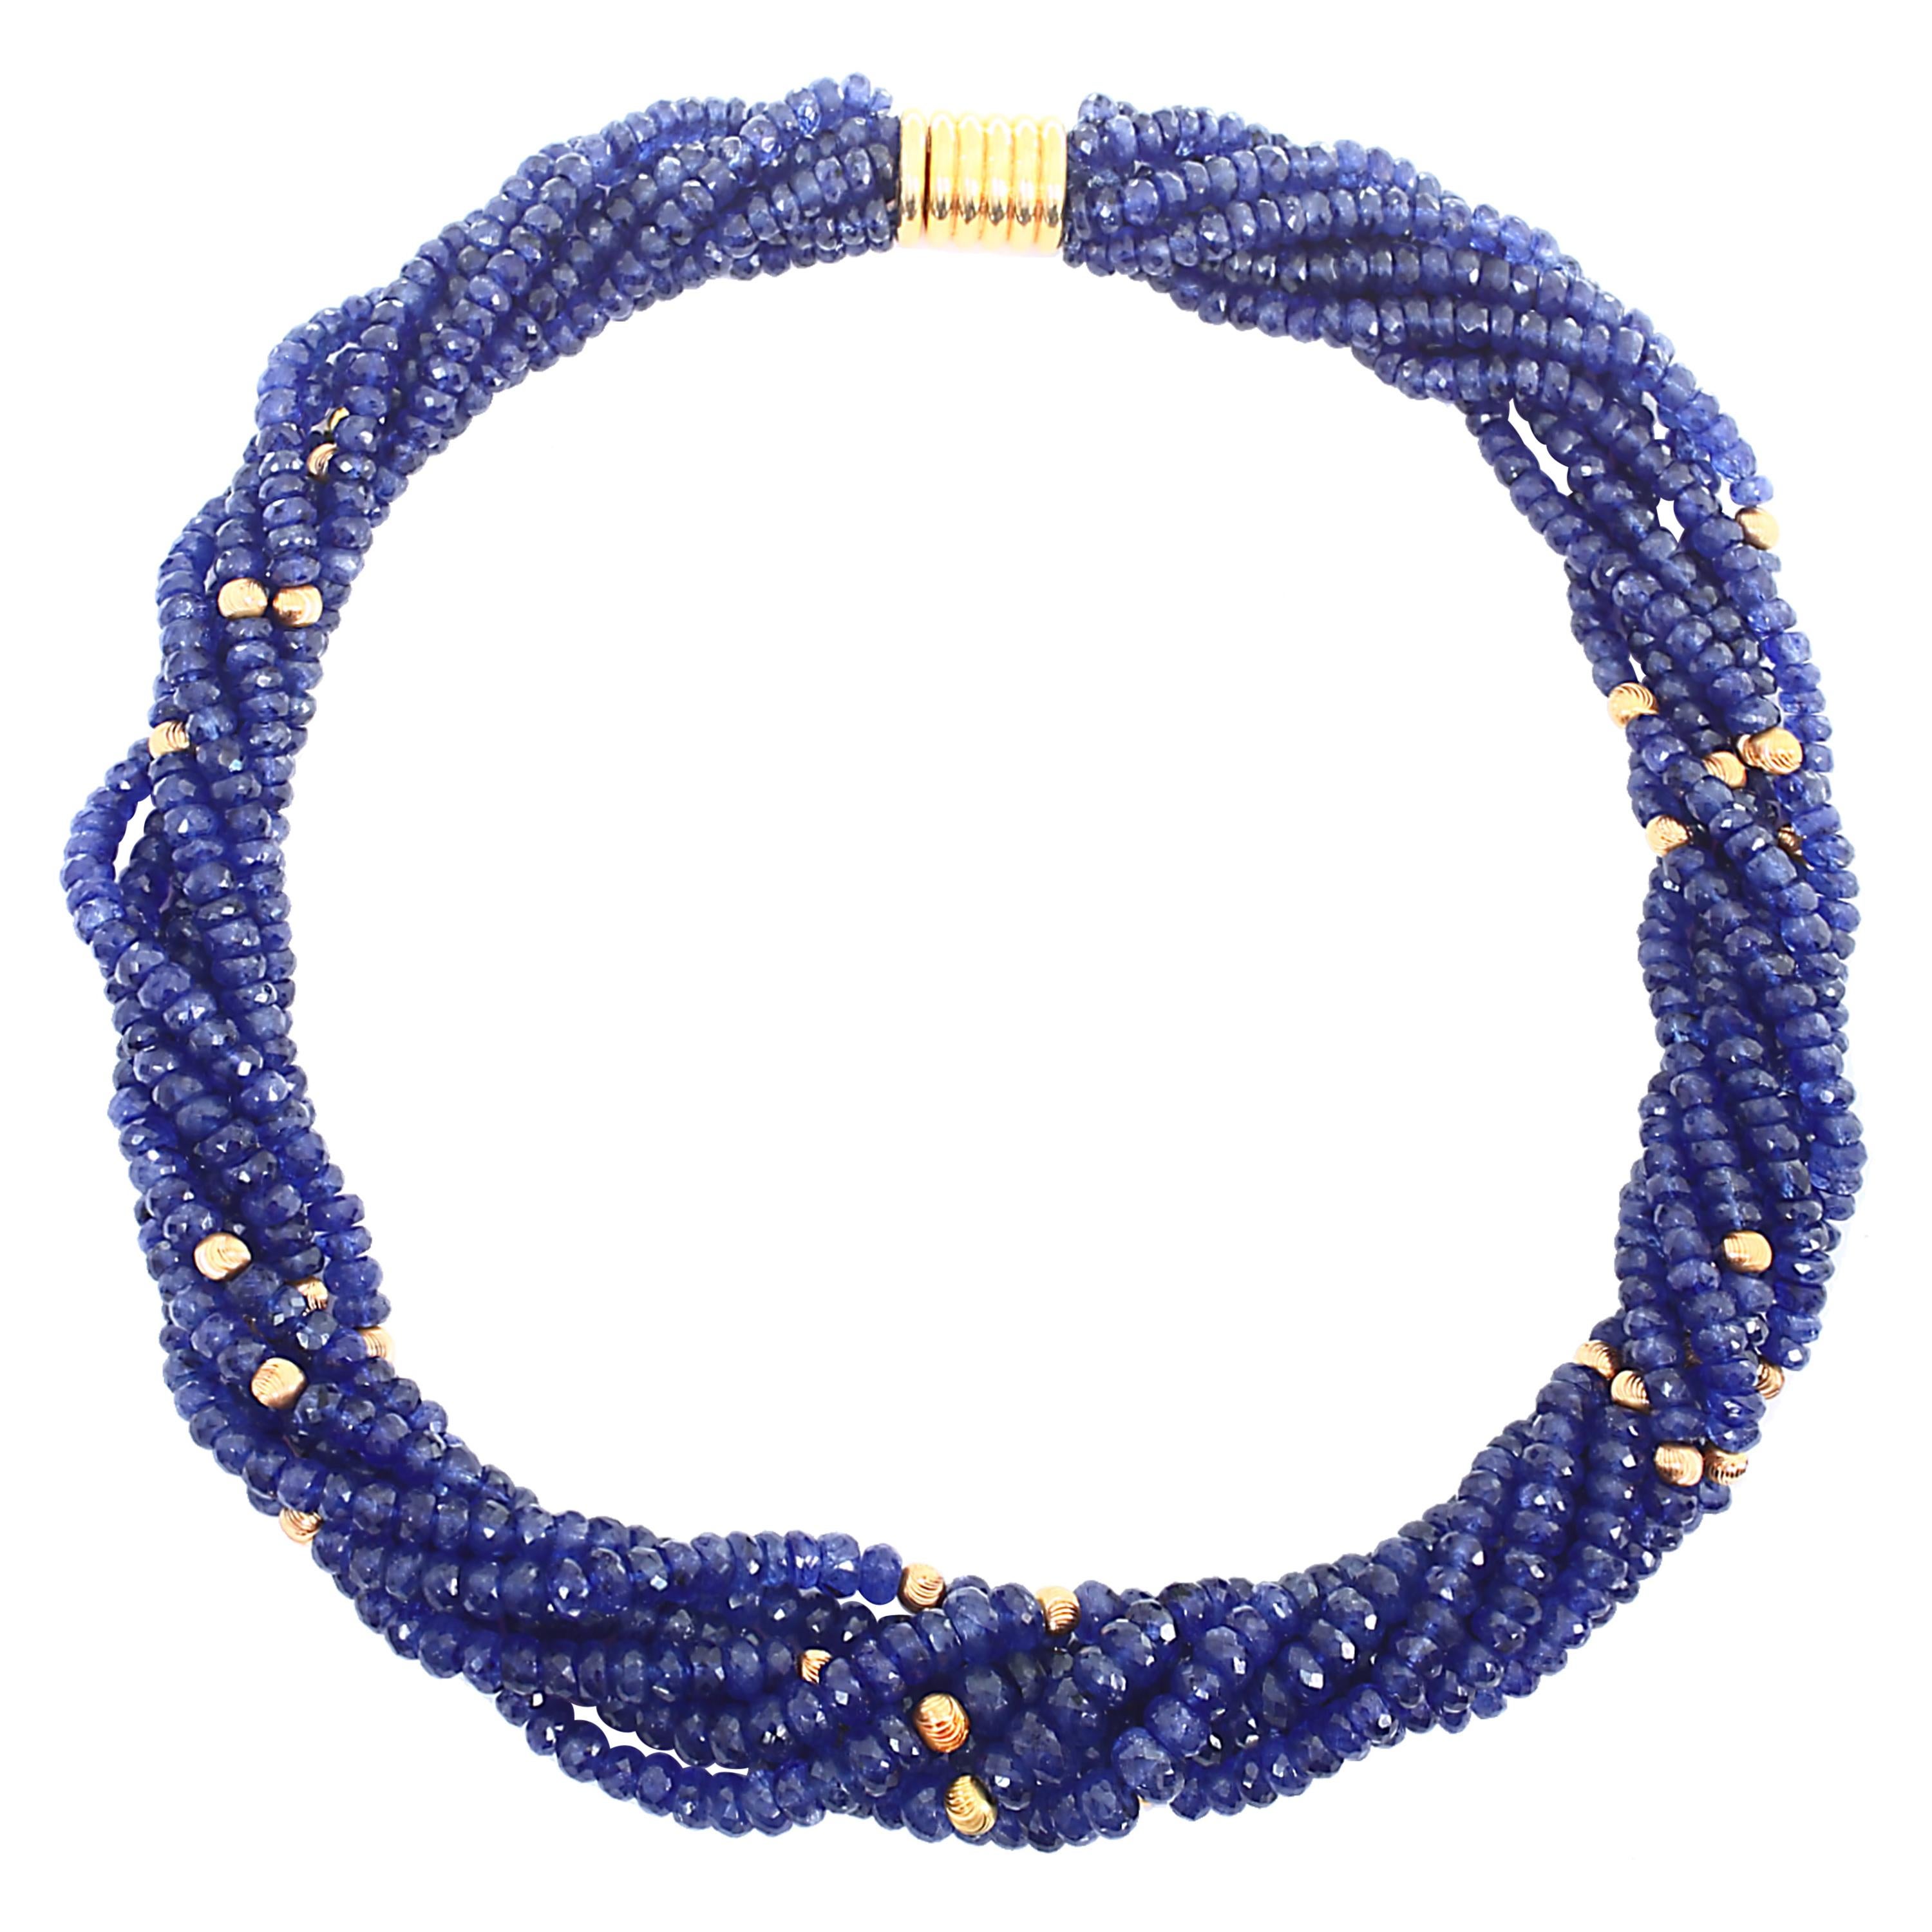 Twisted 1275 Ct Natural Tanzanite Bead Seven Strand Necklace + 15 Gm 14 K Y Gold For Sale